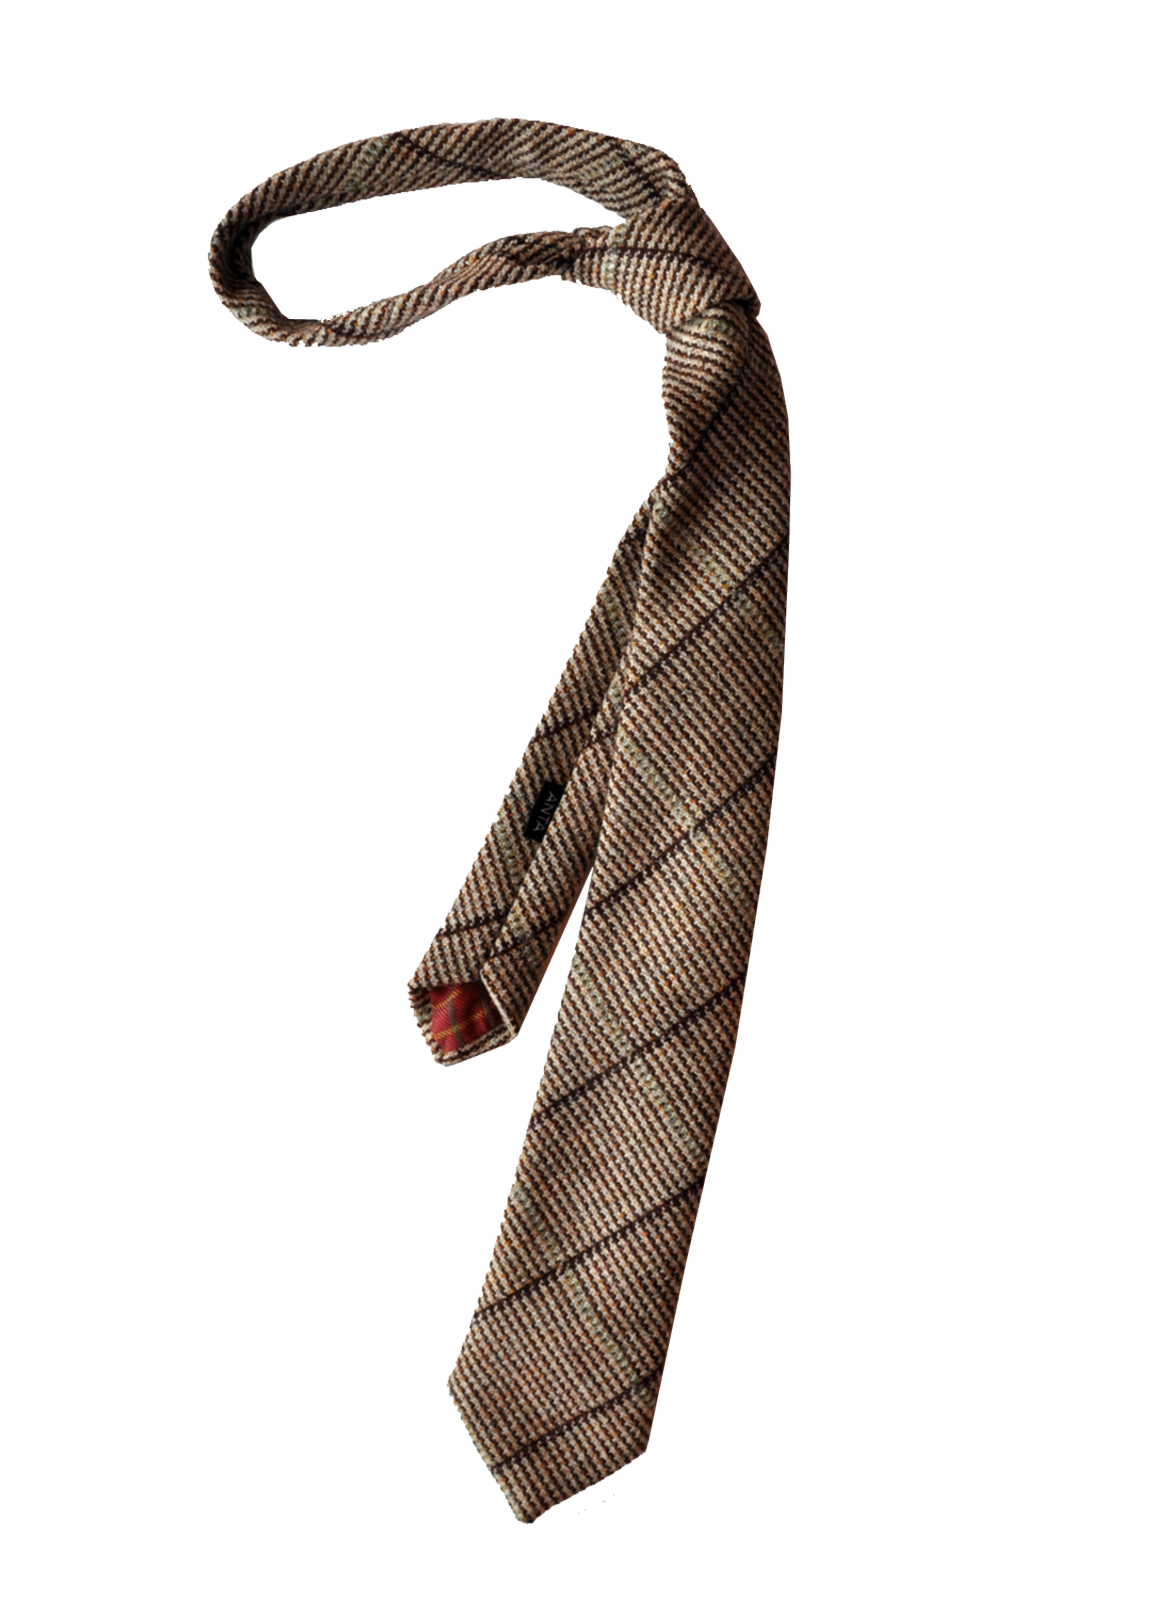 Tie Png Image - Tie, Transparent background PNG HD thumbnail